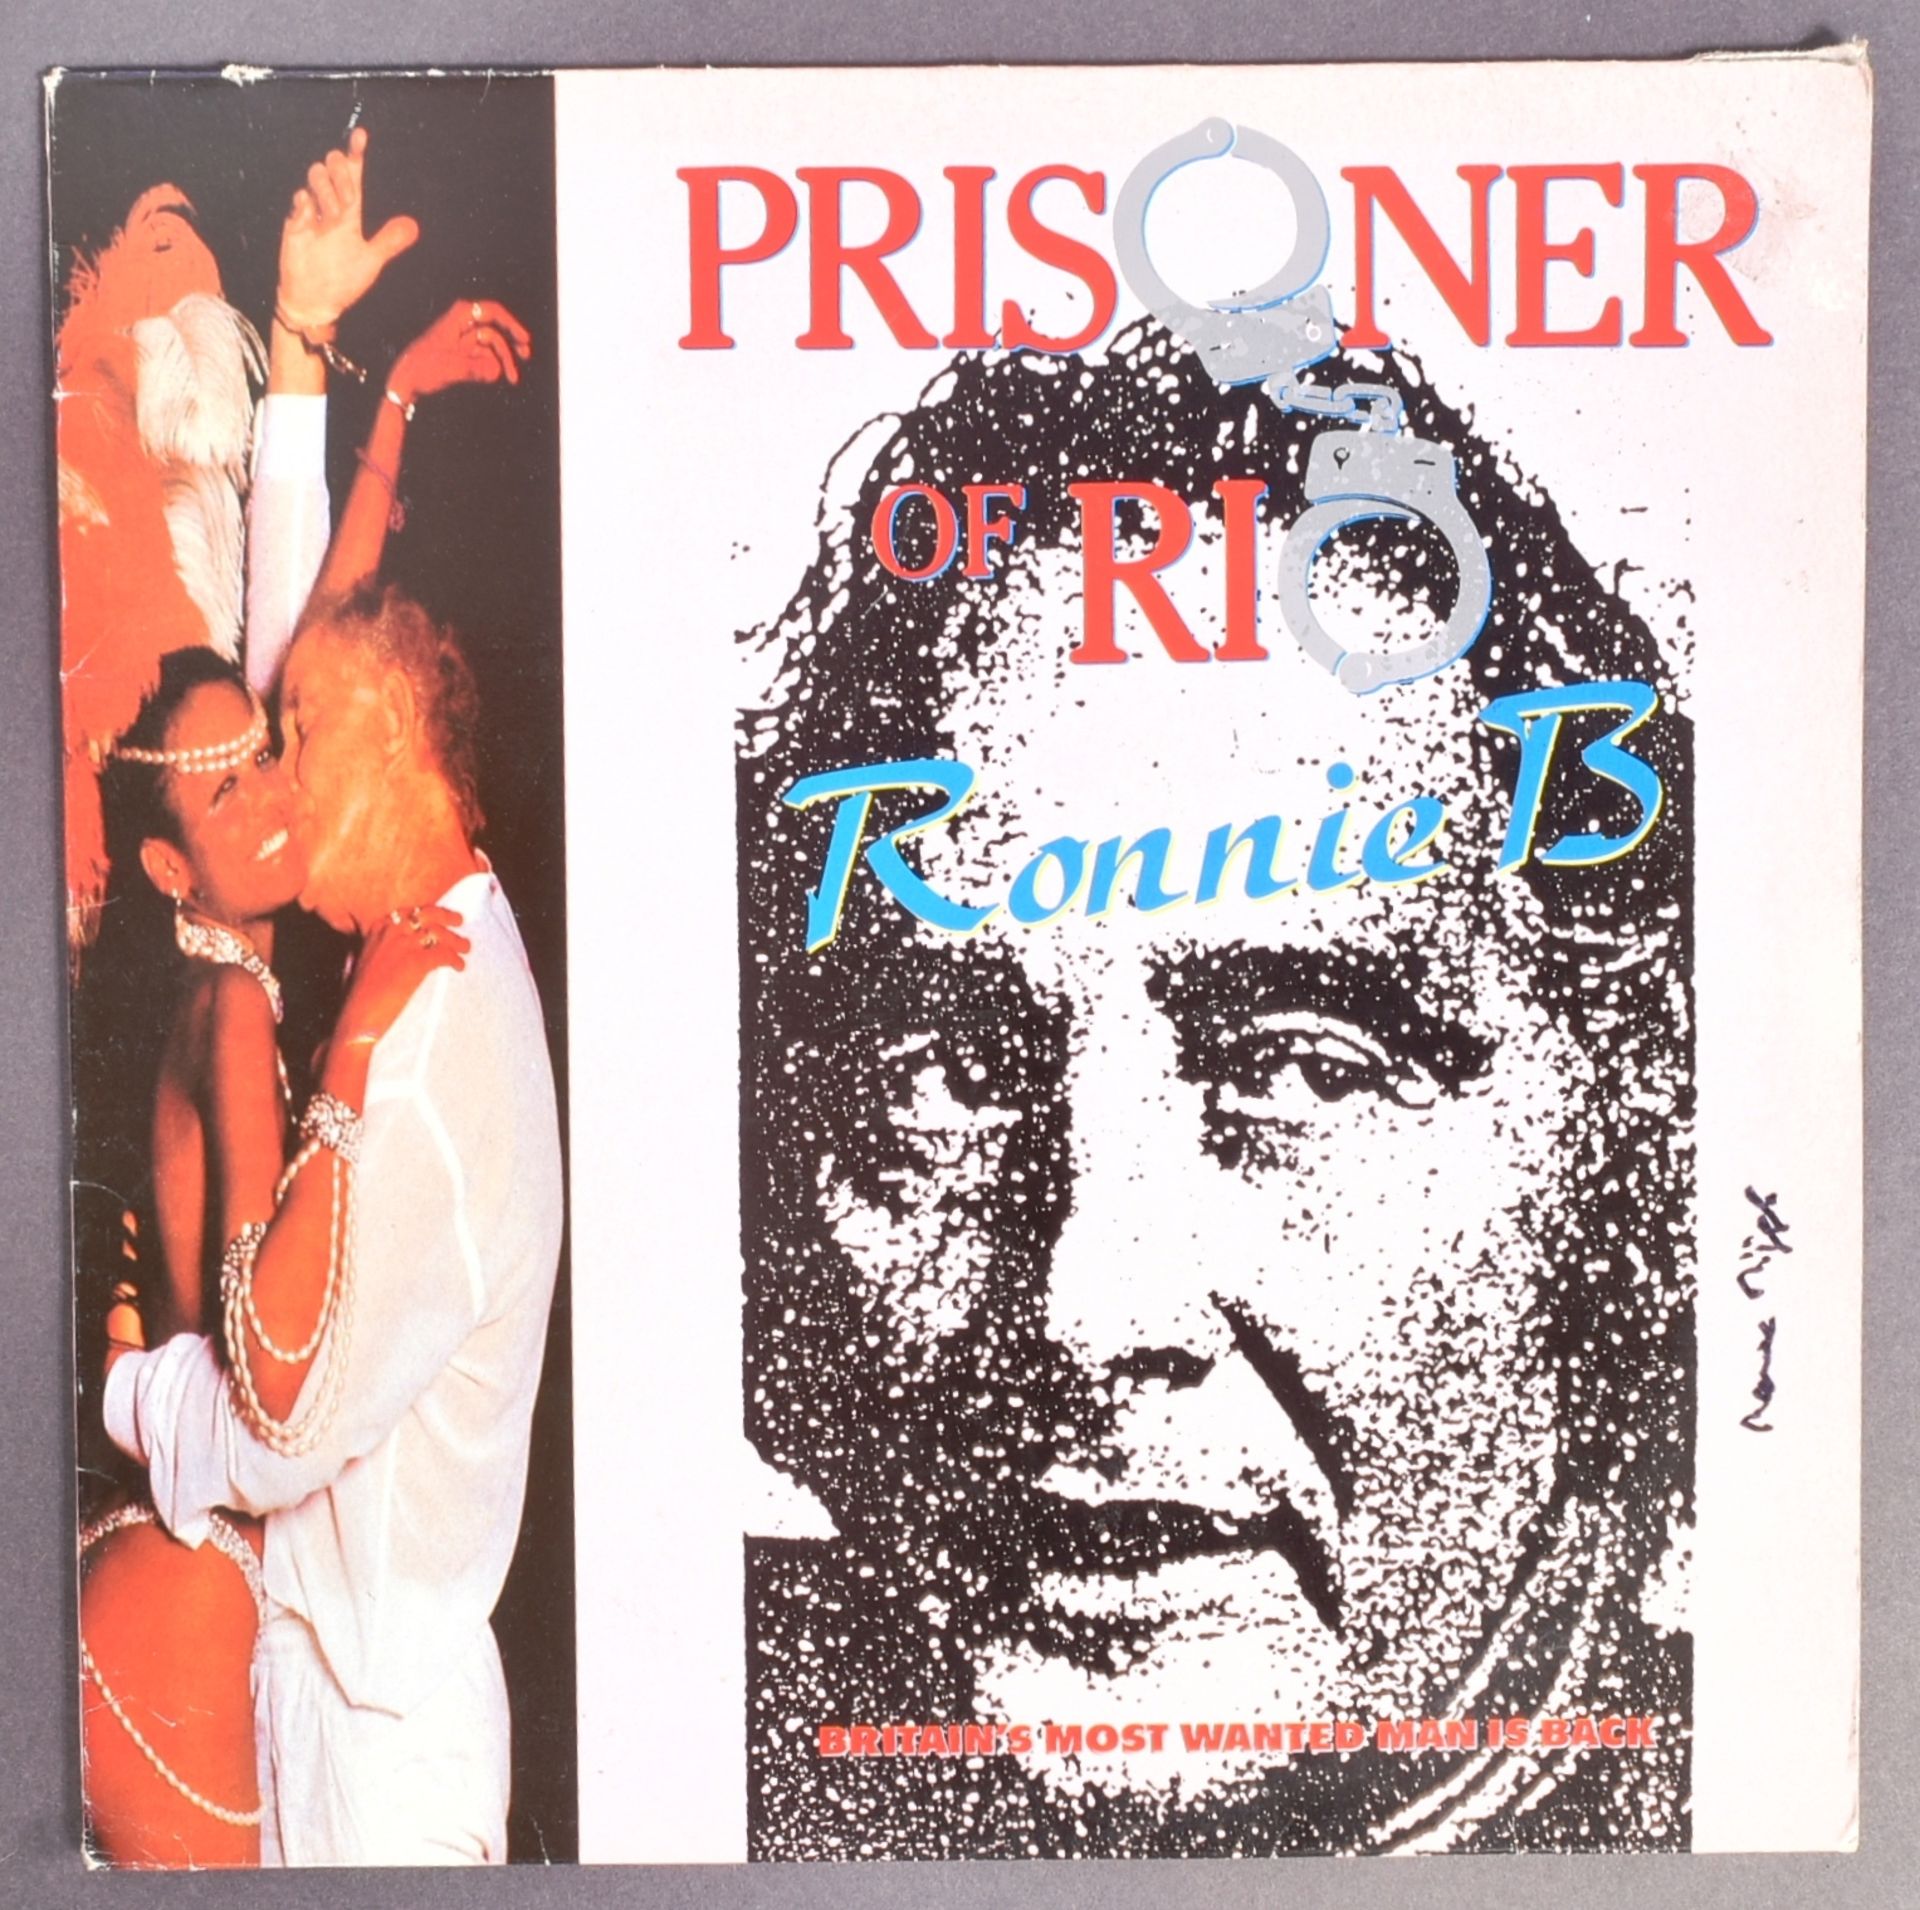 GREAT TRAIN ROBBERY - PRISONER OF RIO - RONNIE BIGGS SIGNED LP - Image 2 of 5